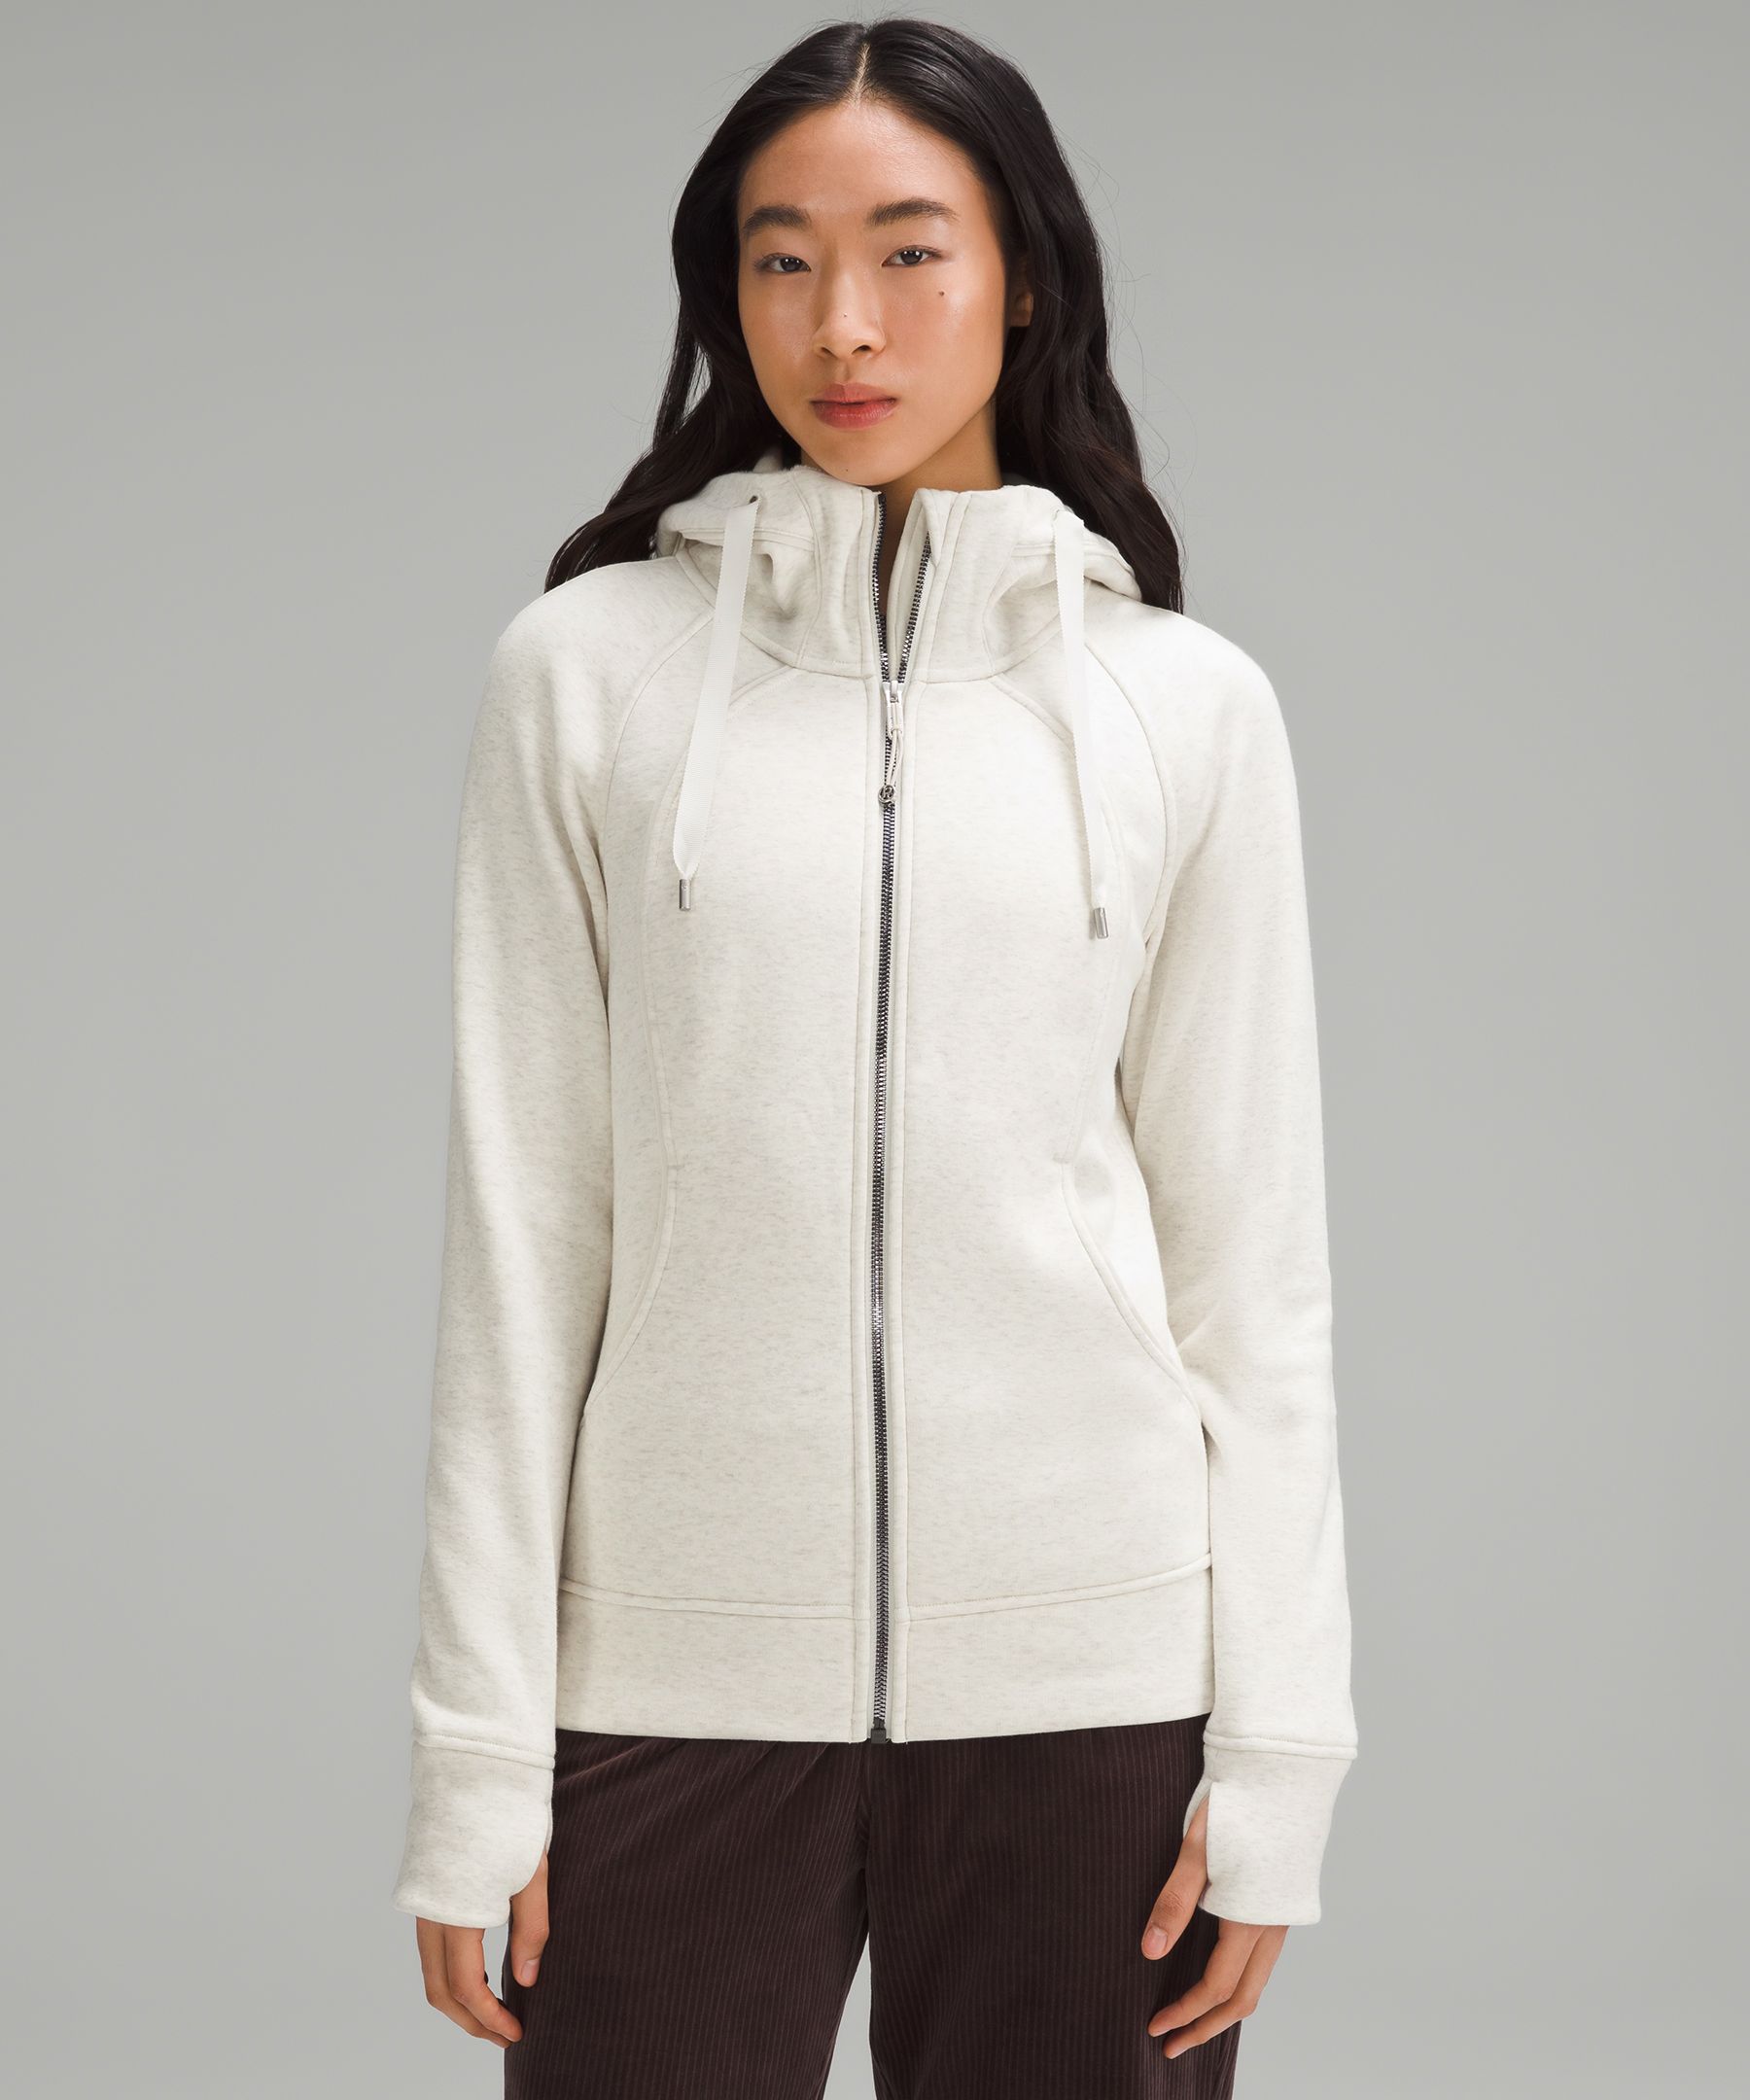 Lululemon shoppers are obsessed with this fleece Scuba hoodie for fall and  winter